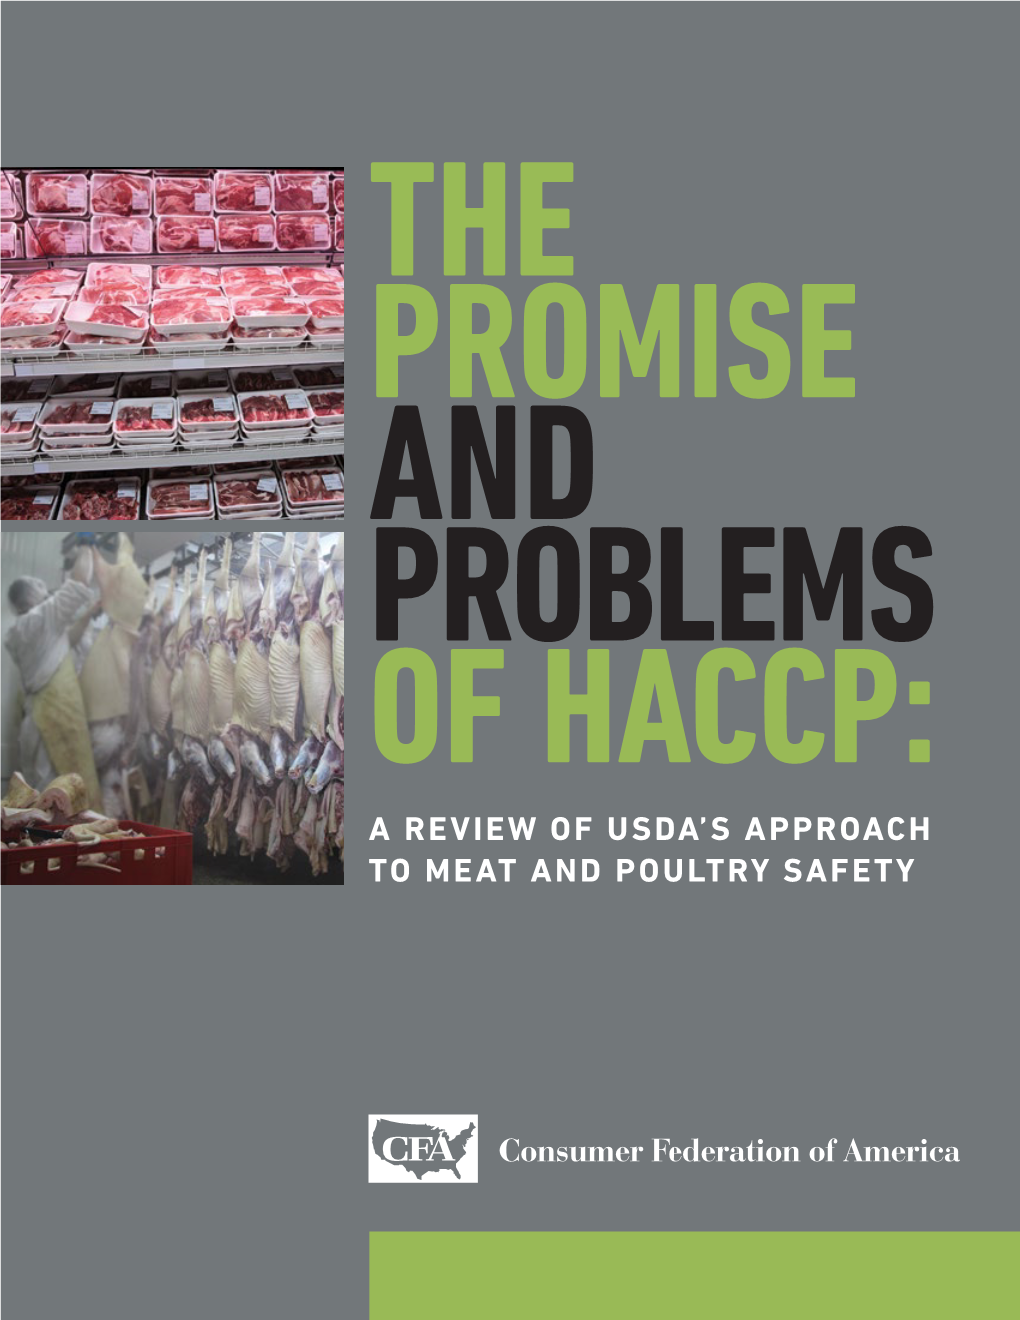 The Promise and Problems of HACCP: a Review of USDA's Approach To